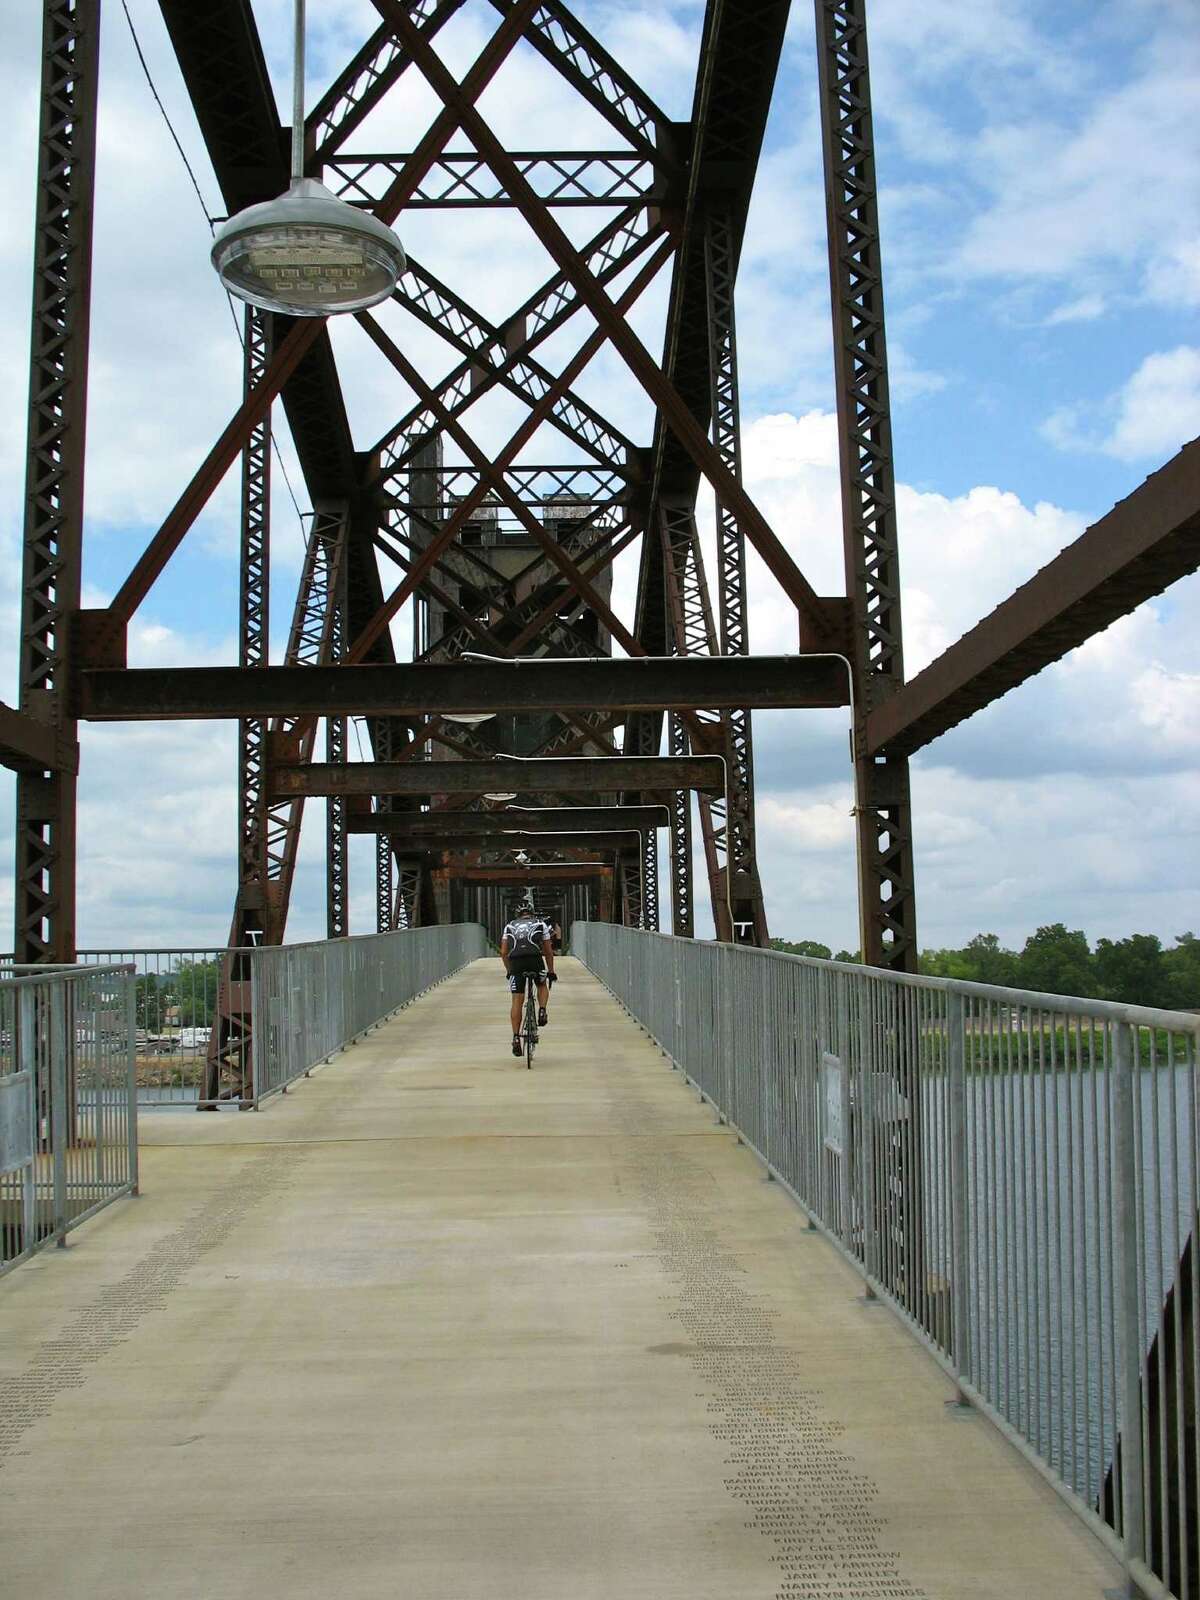 An old railroad bridge crossing the Arkansas River near the Clinton Presidential Library in Little Rock was converted to a bridge for walkers, joggers and bicyclists. It's one of four that are part of of the 17-mile River Trail.